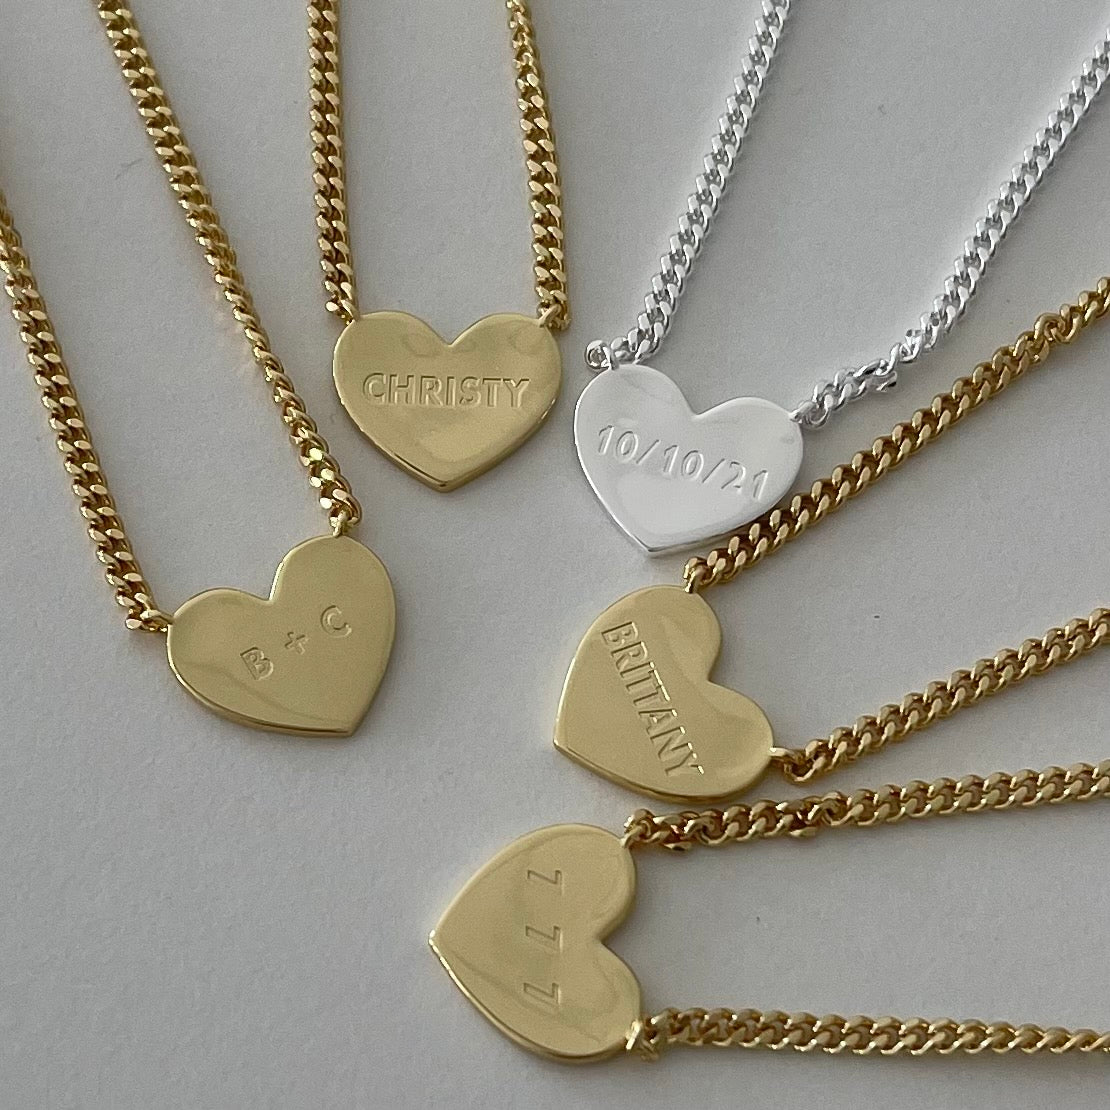 Engraved Heart Shaped Necklace and Earrings Jewelry Set - Walmart.com